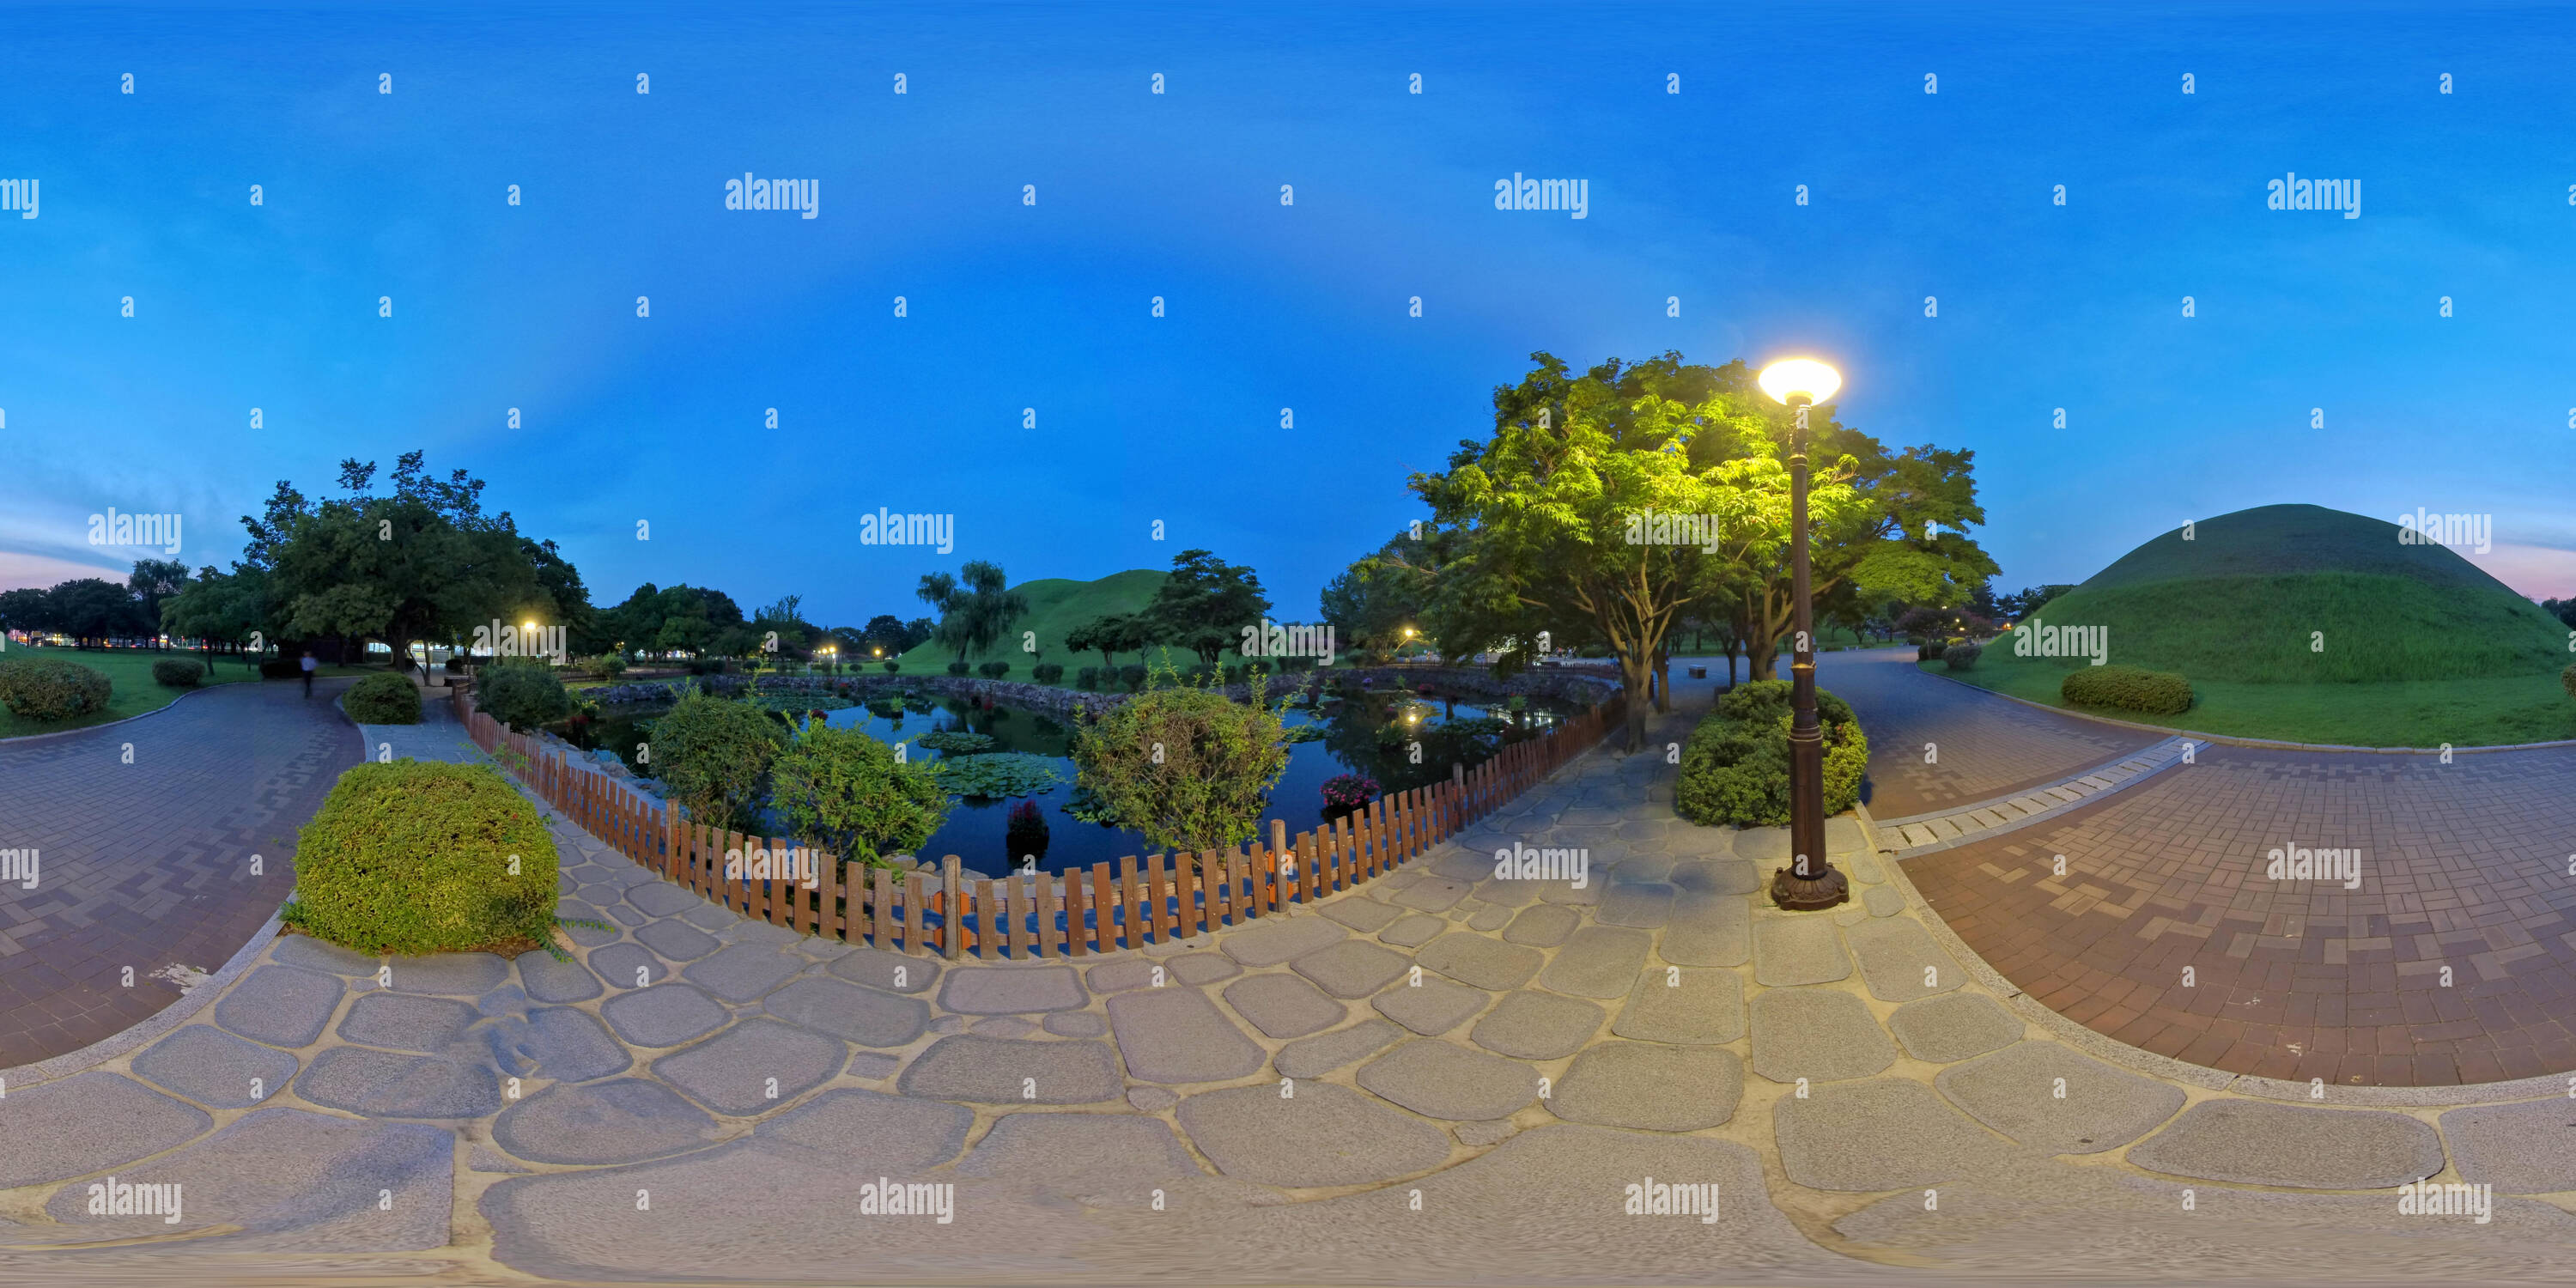 360 degree panoramic view of Gyeongju, South Korea 26 August 2019: Daereungwon Ancient Tomb Complex 360 Degrees Panoramic view. Large ancient tombs of kings and nobles of the Sill